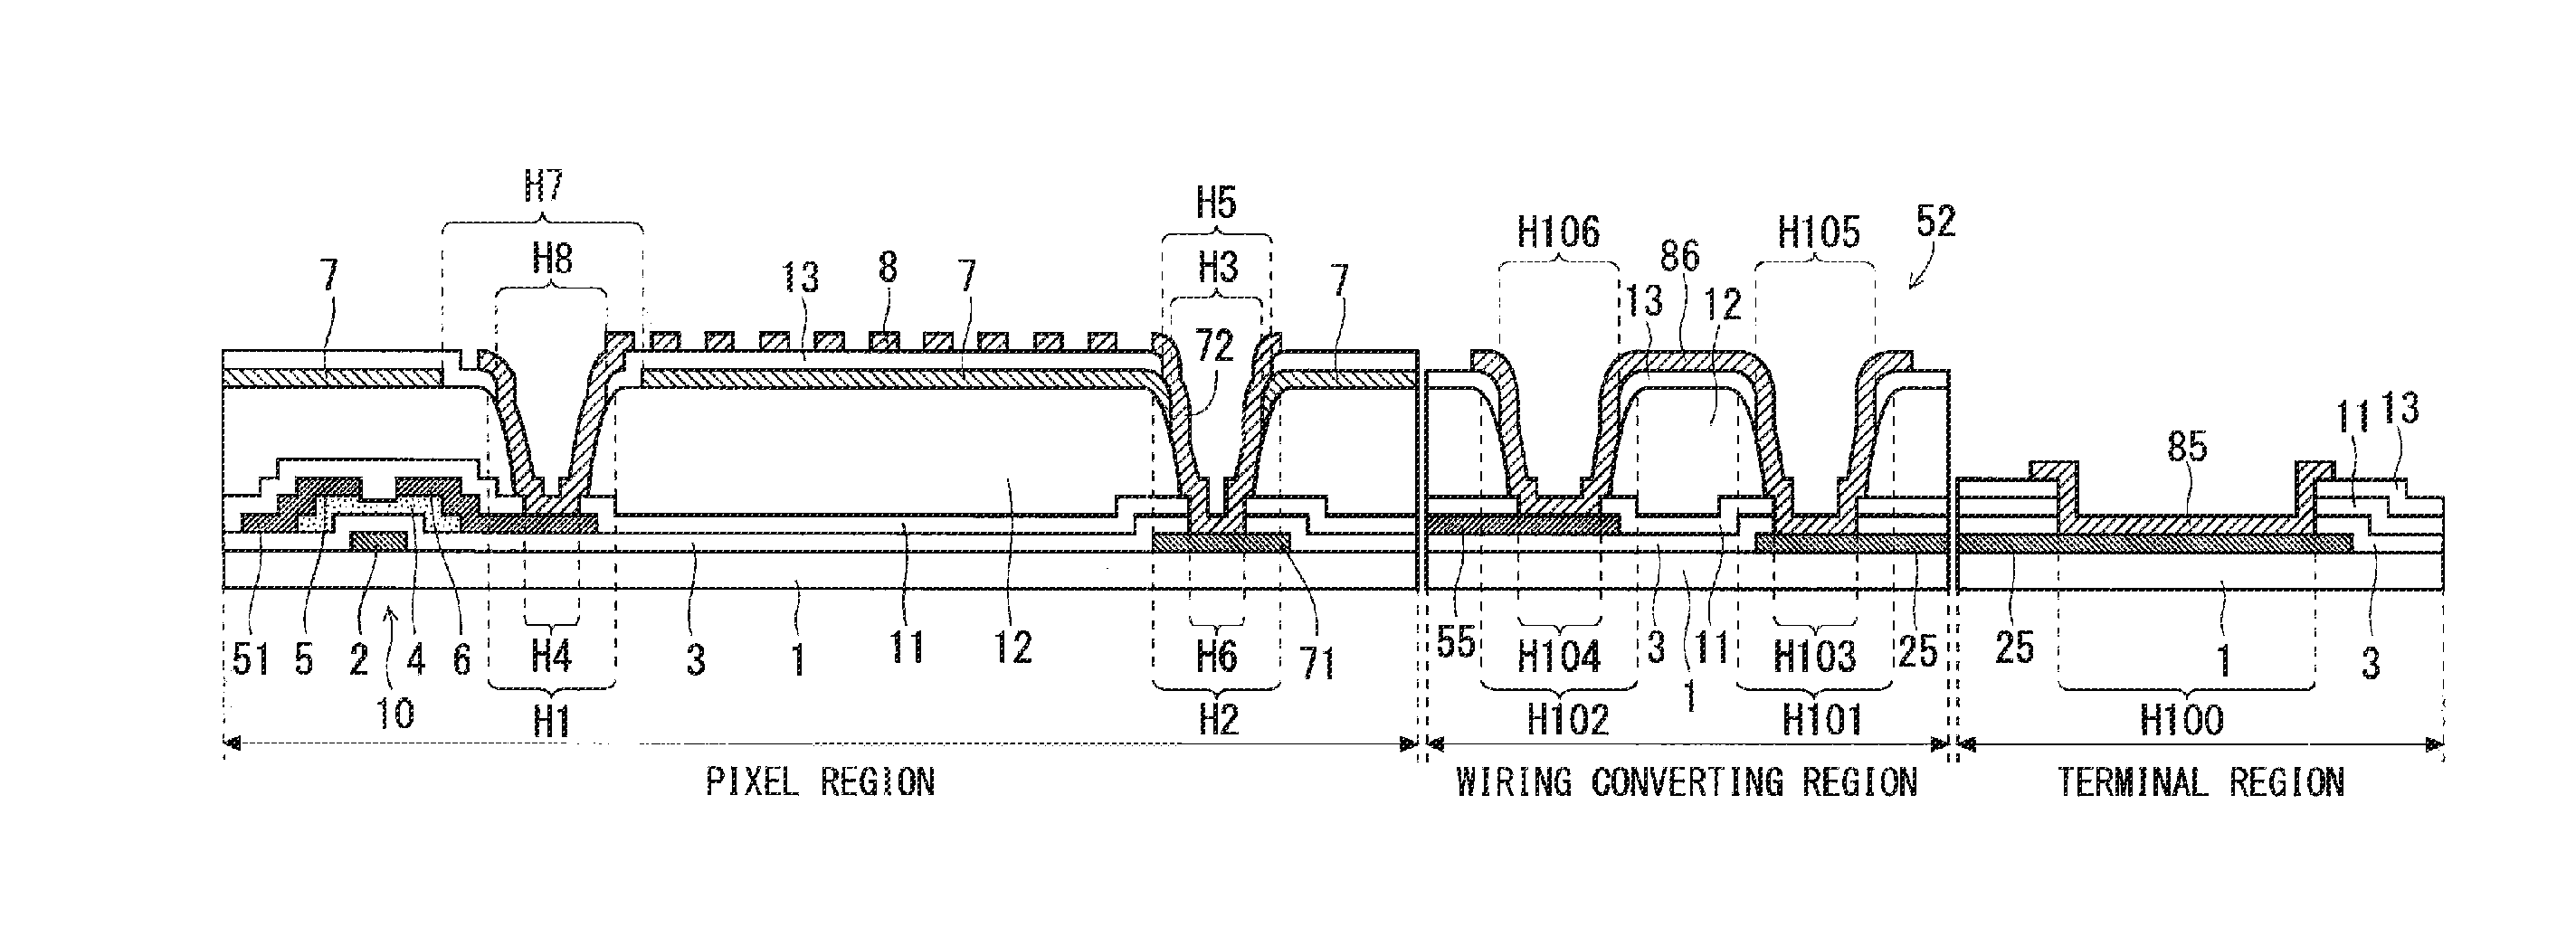 Thin film transistor array substrate